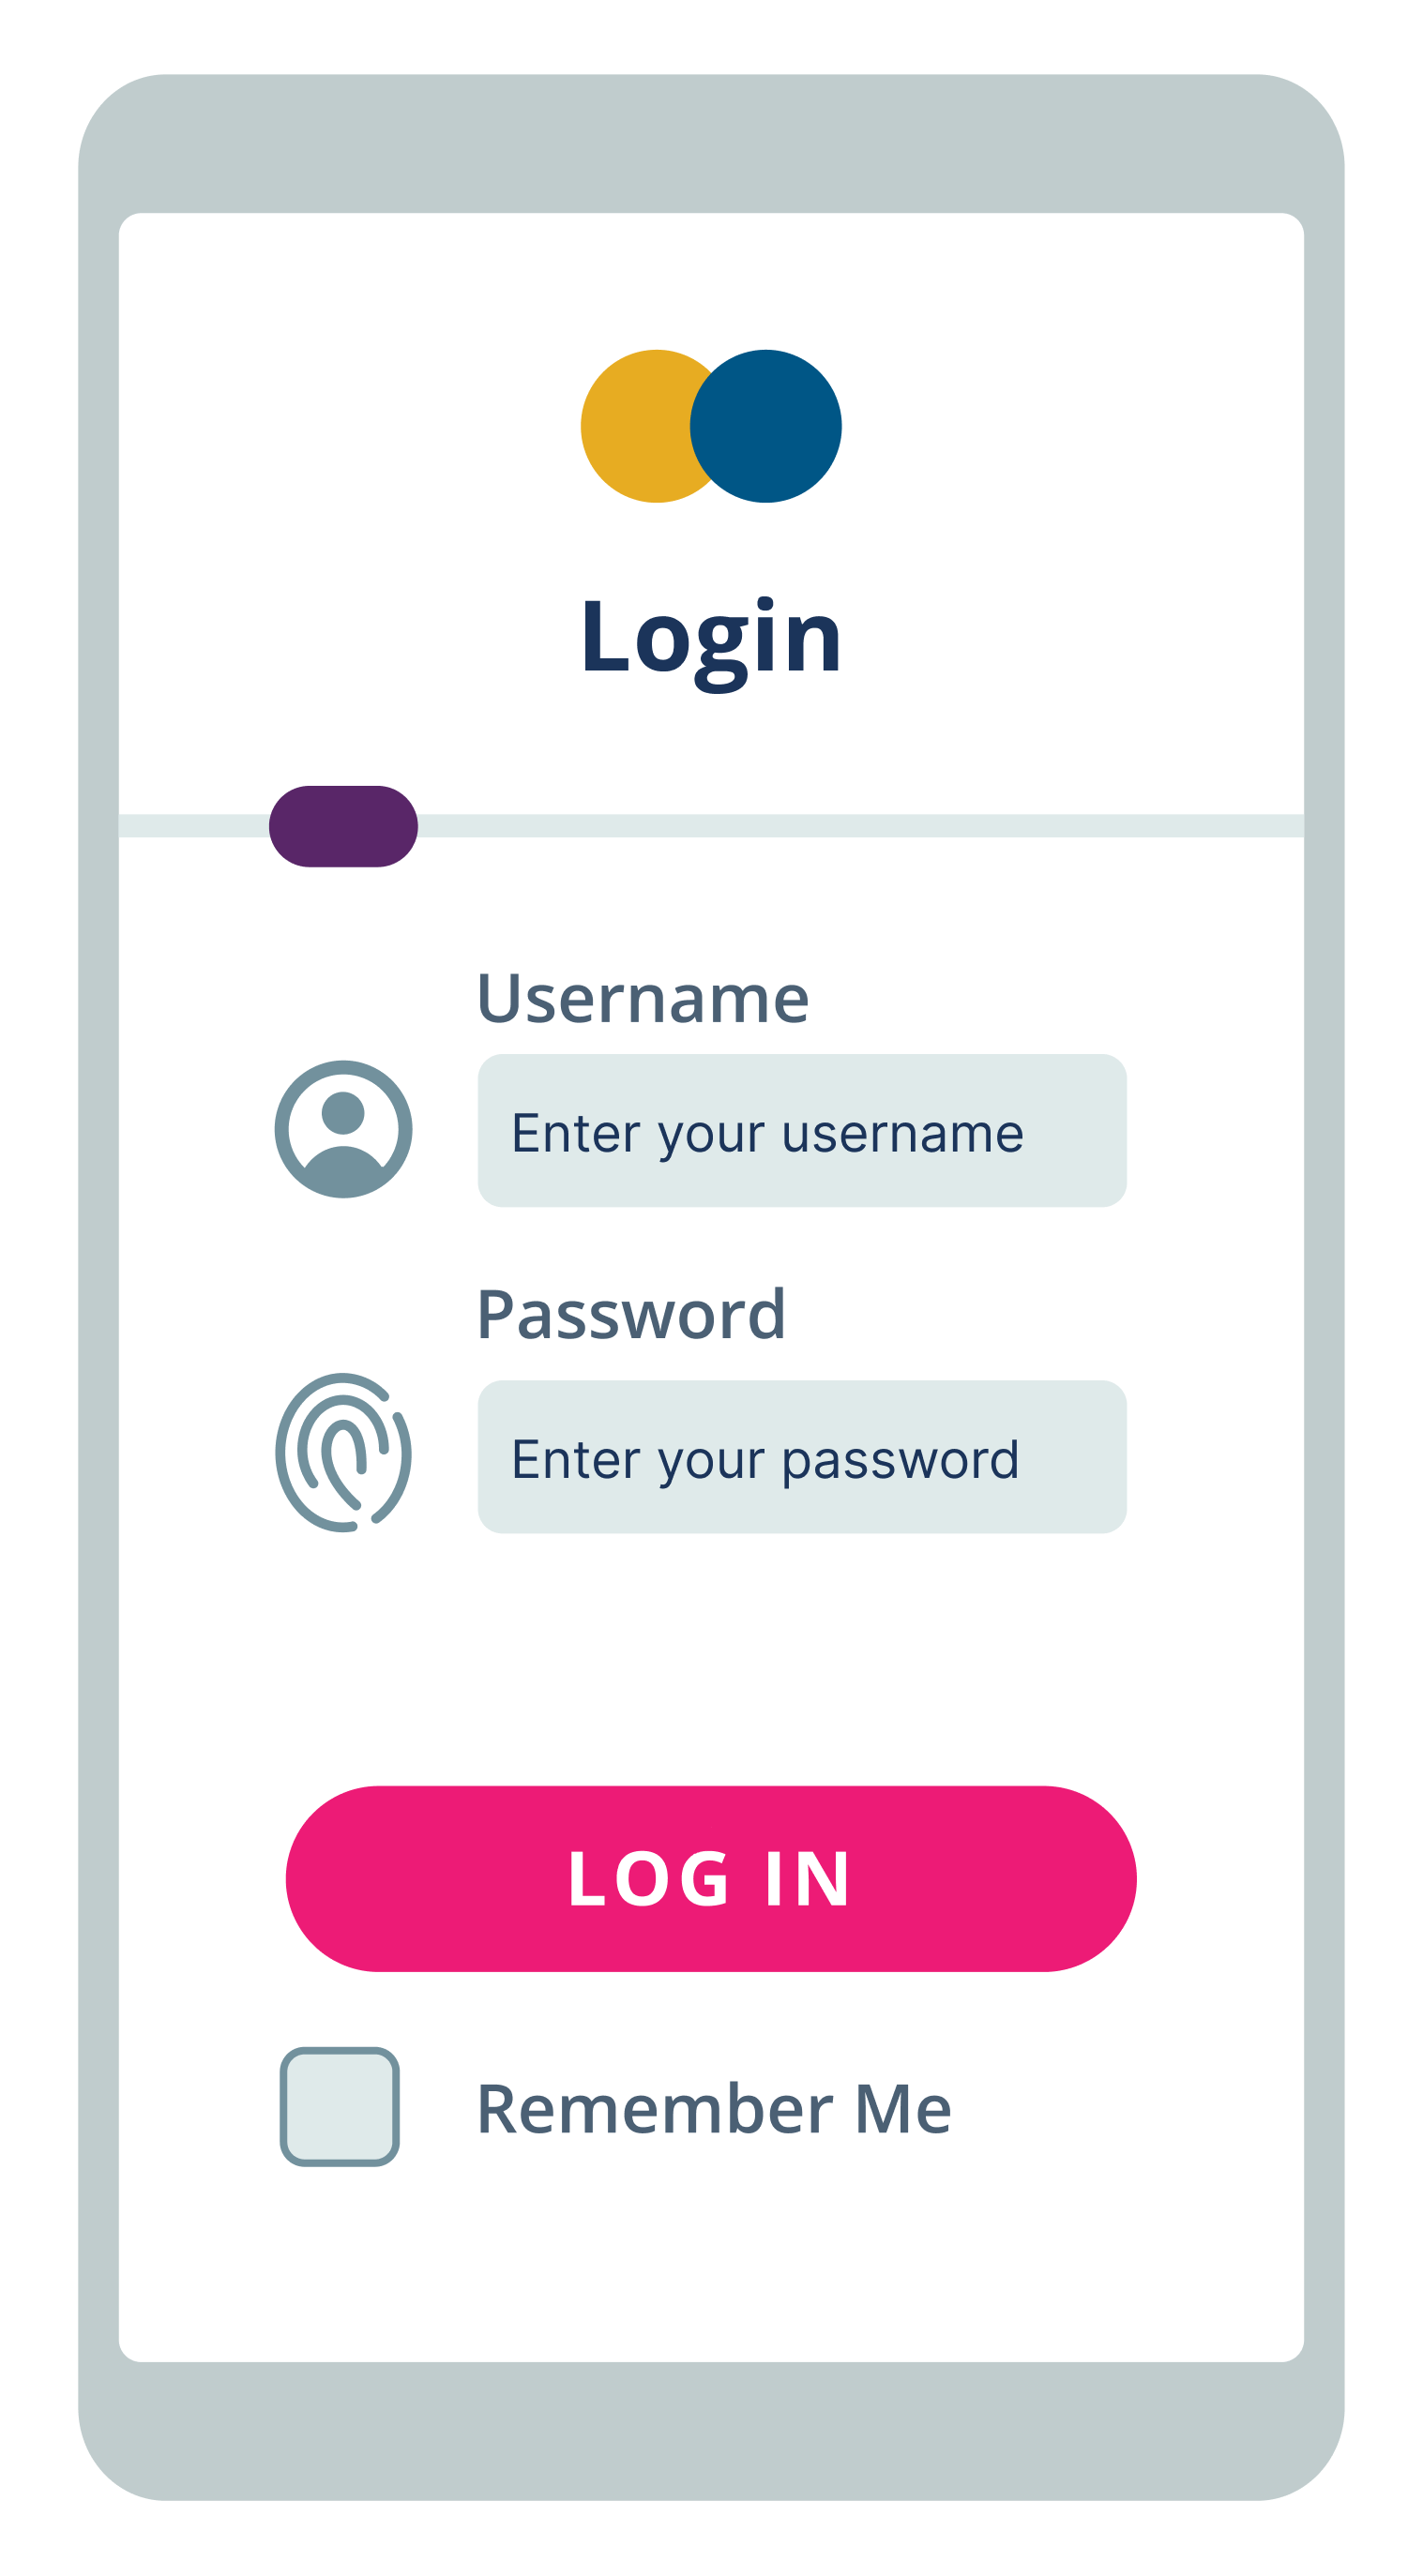 automated testing - Want to test  site login without using